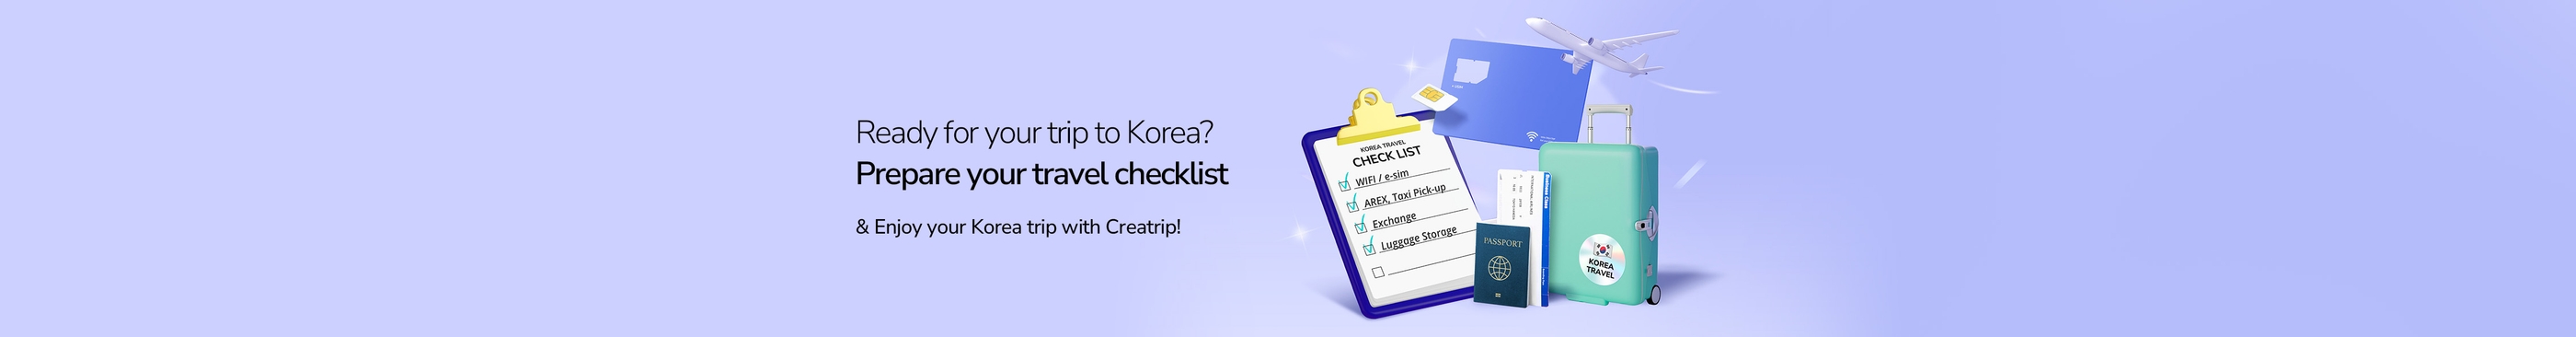 Ready for your trip to Korea? Prepare your travel checklist!